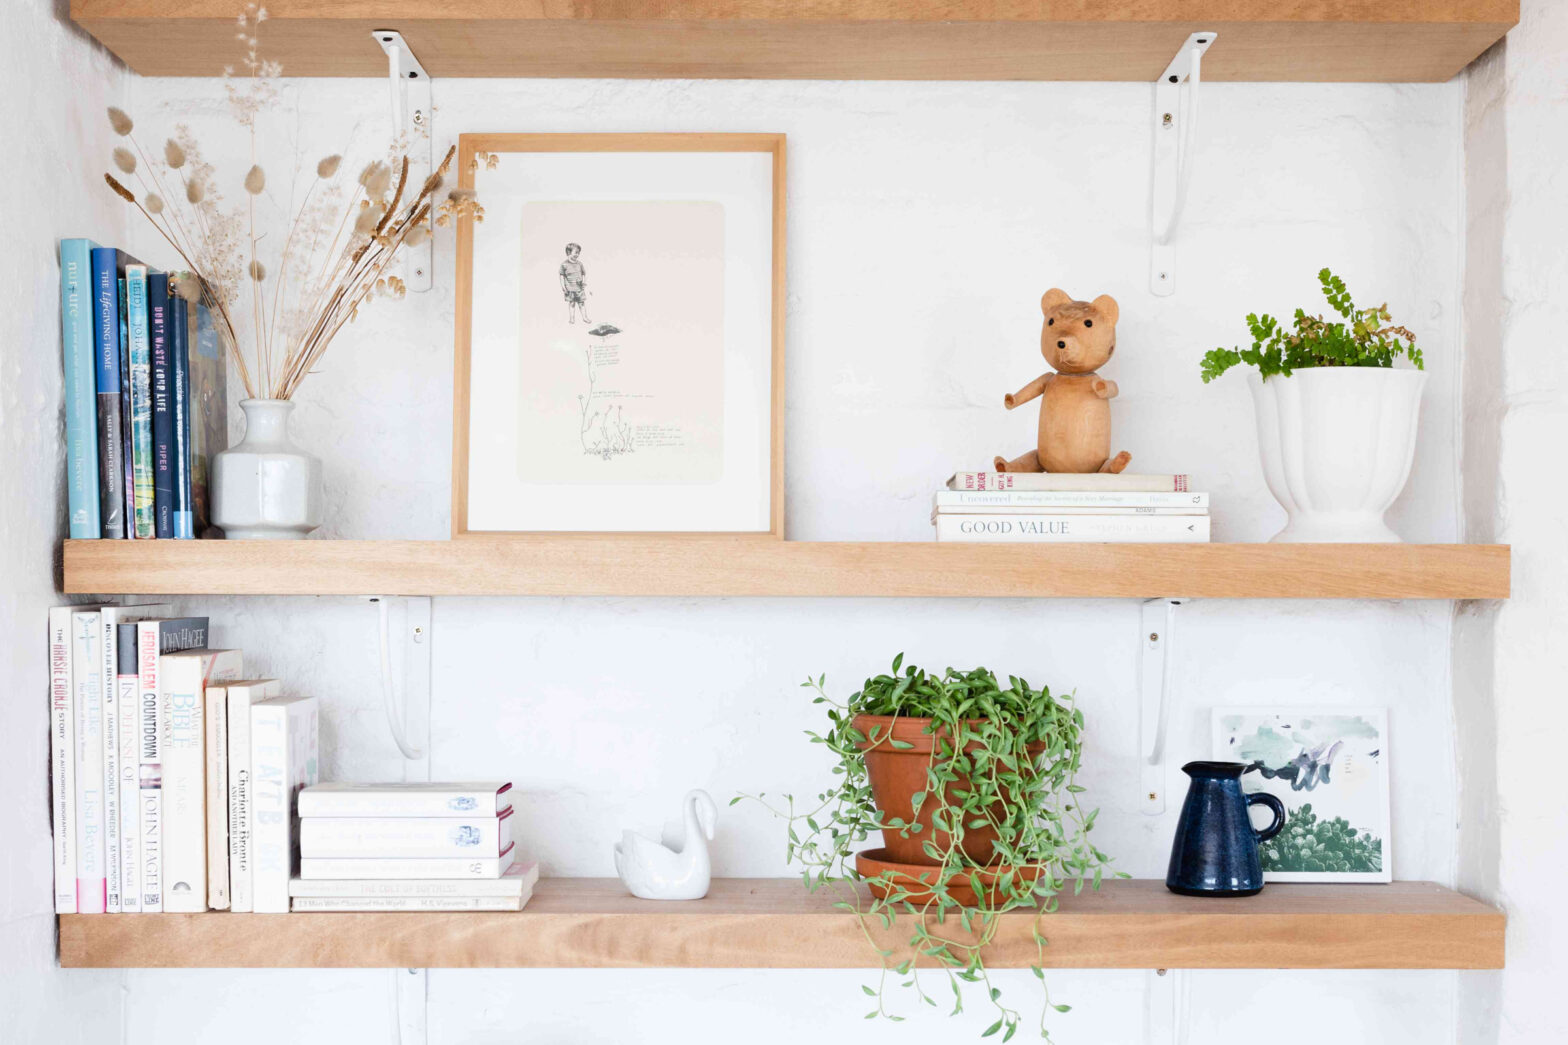 Enhance the Look of Your Shelf with Stylish Decor Featured Image